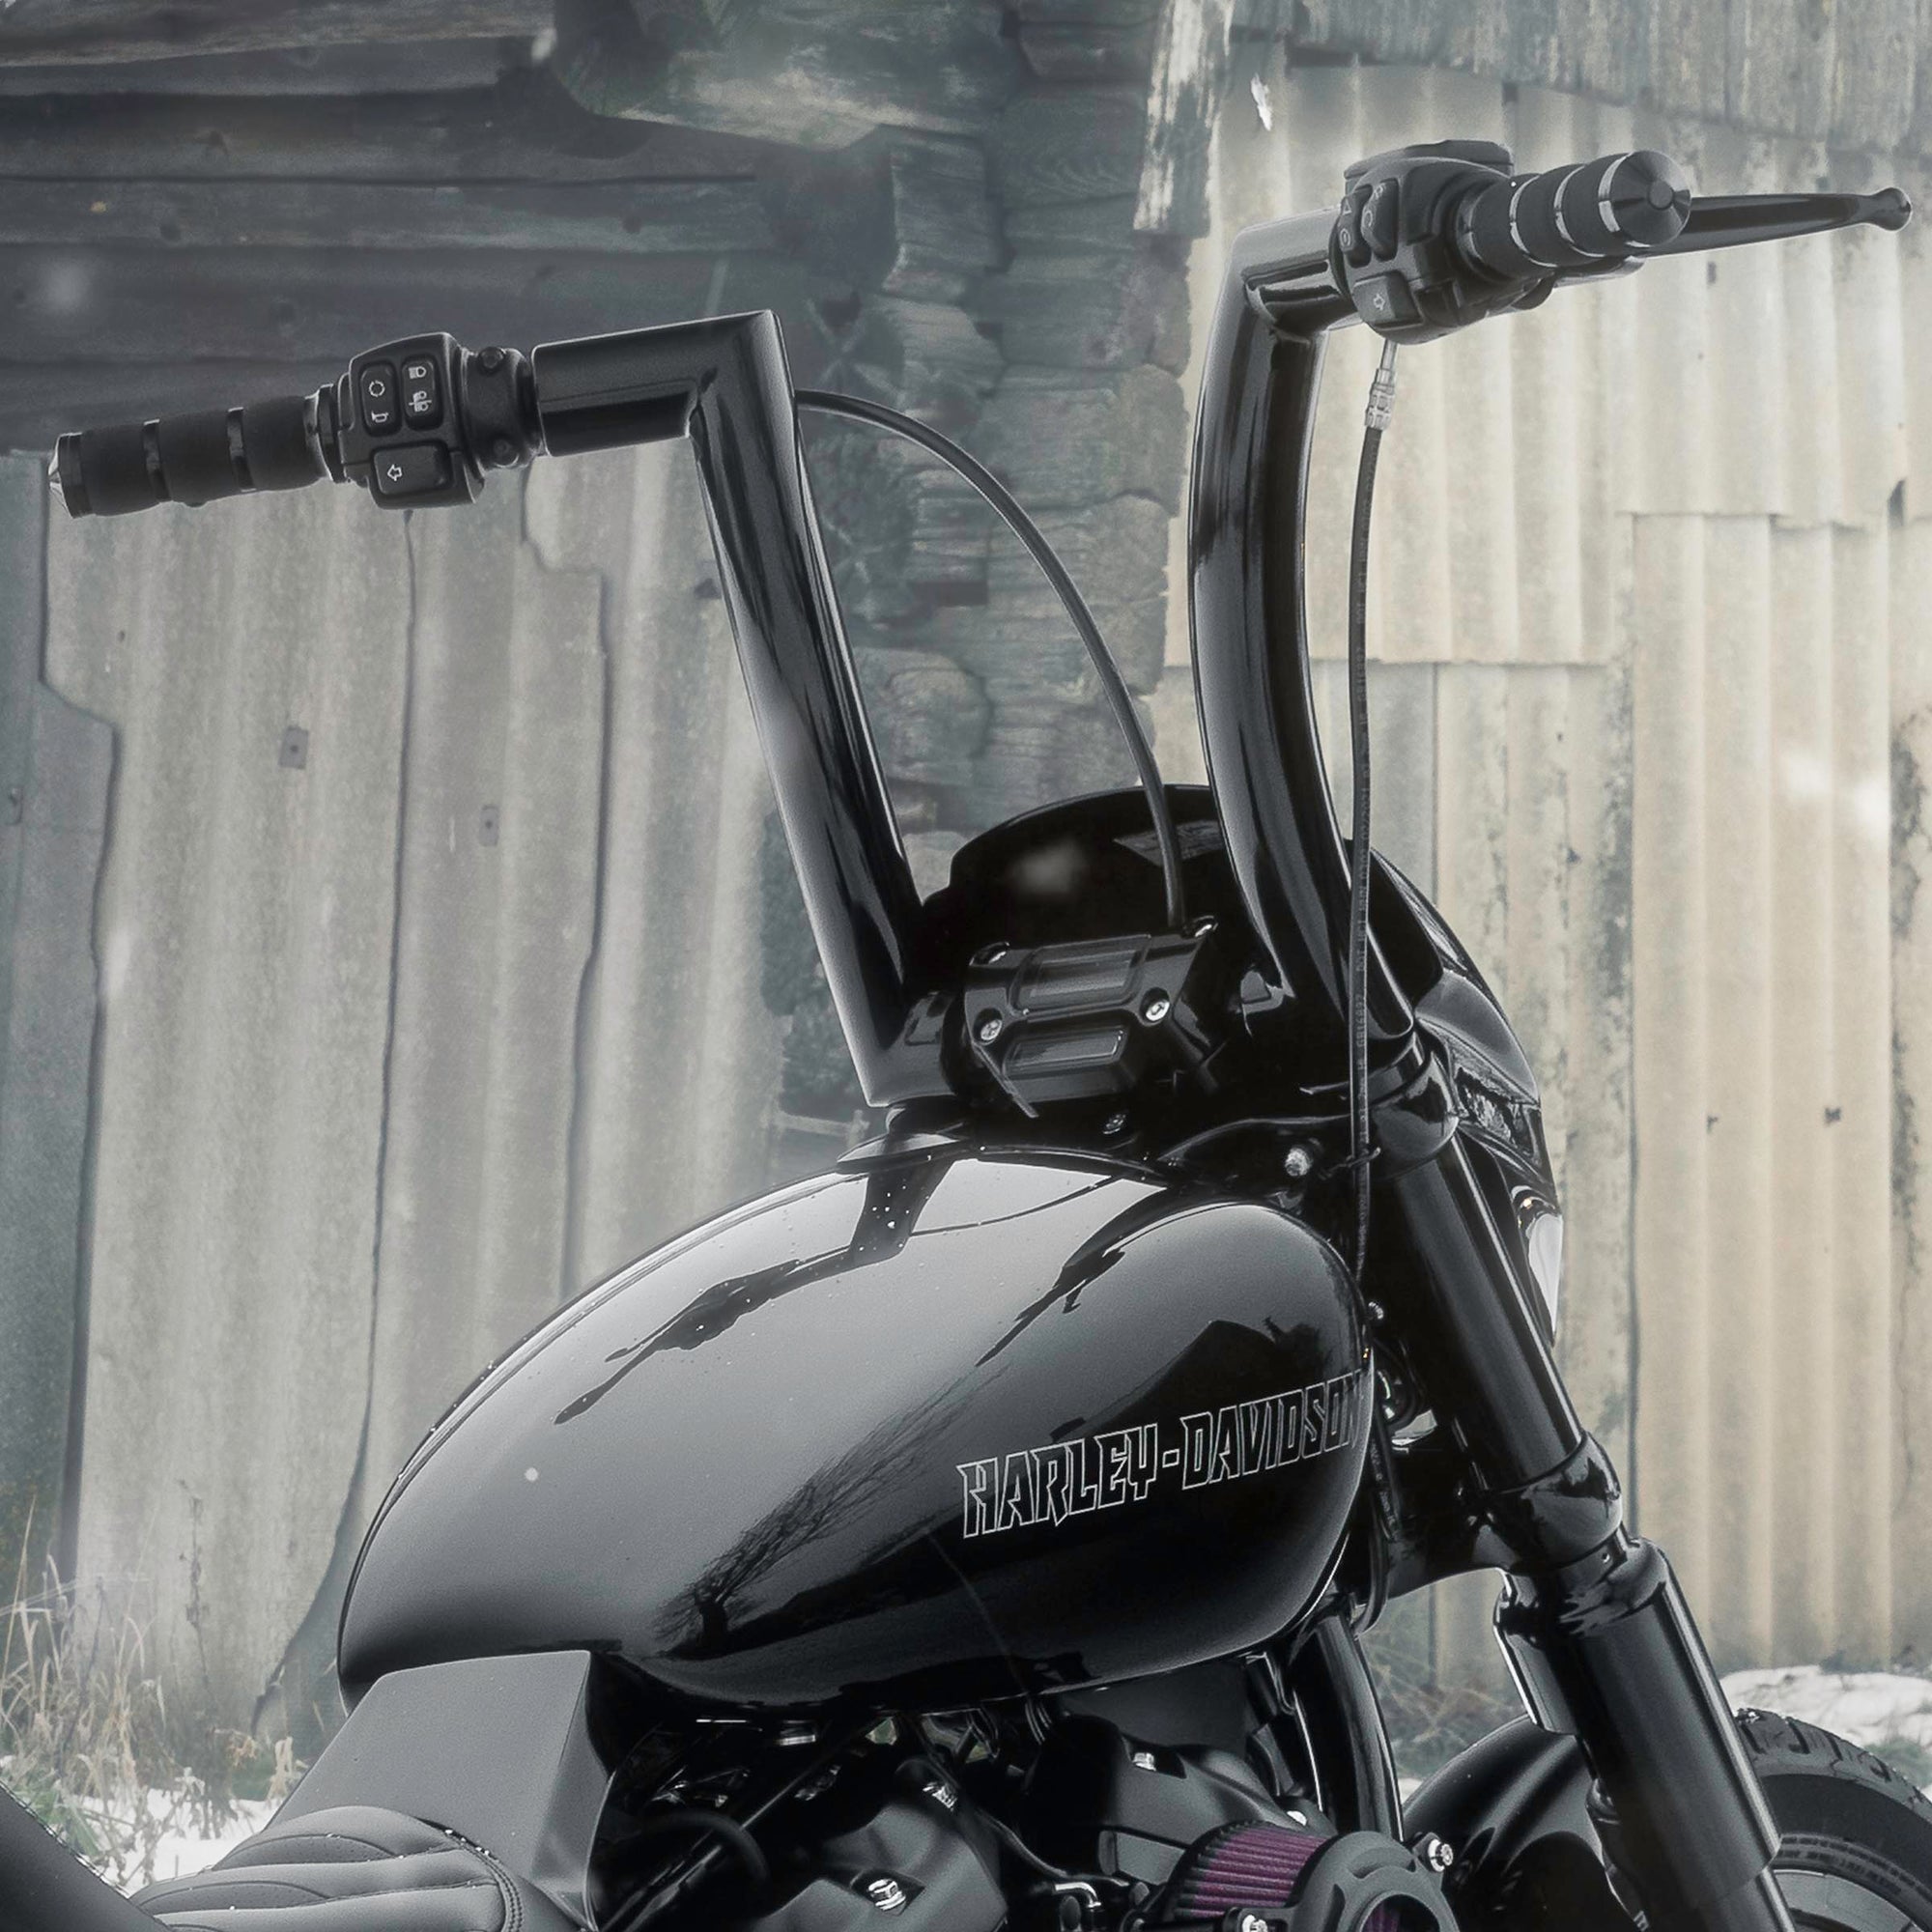 Zoomed Harley Davidson motorcycle with Killer Custom parts outside on a snowy day in an abandoned environment